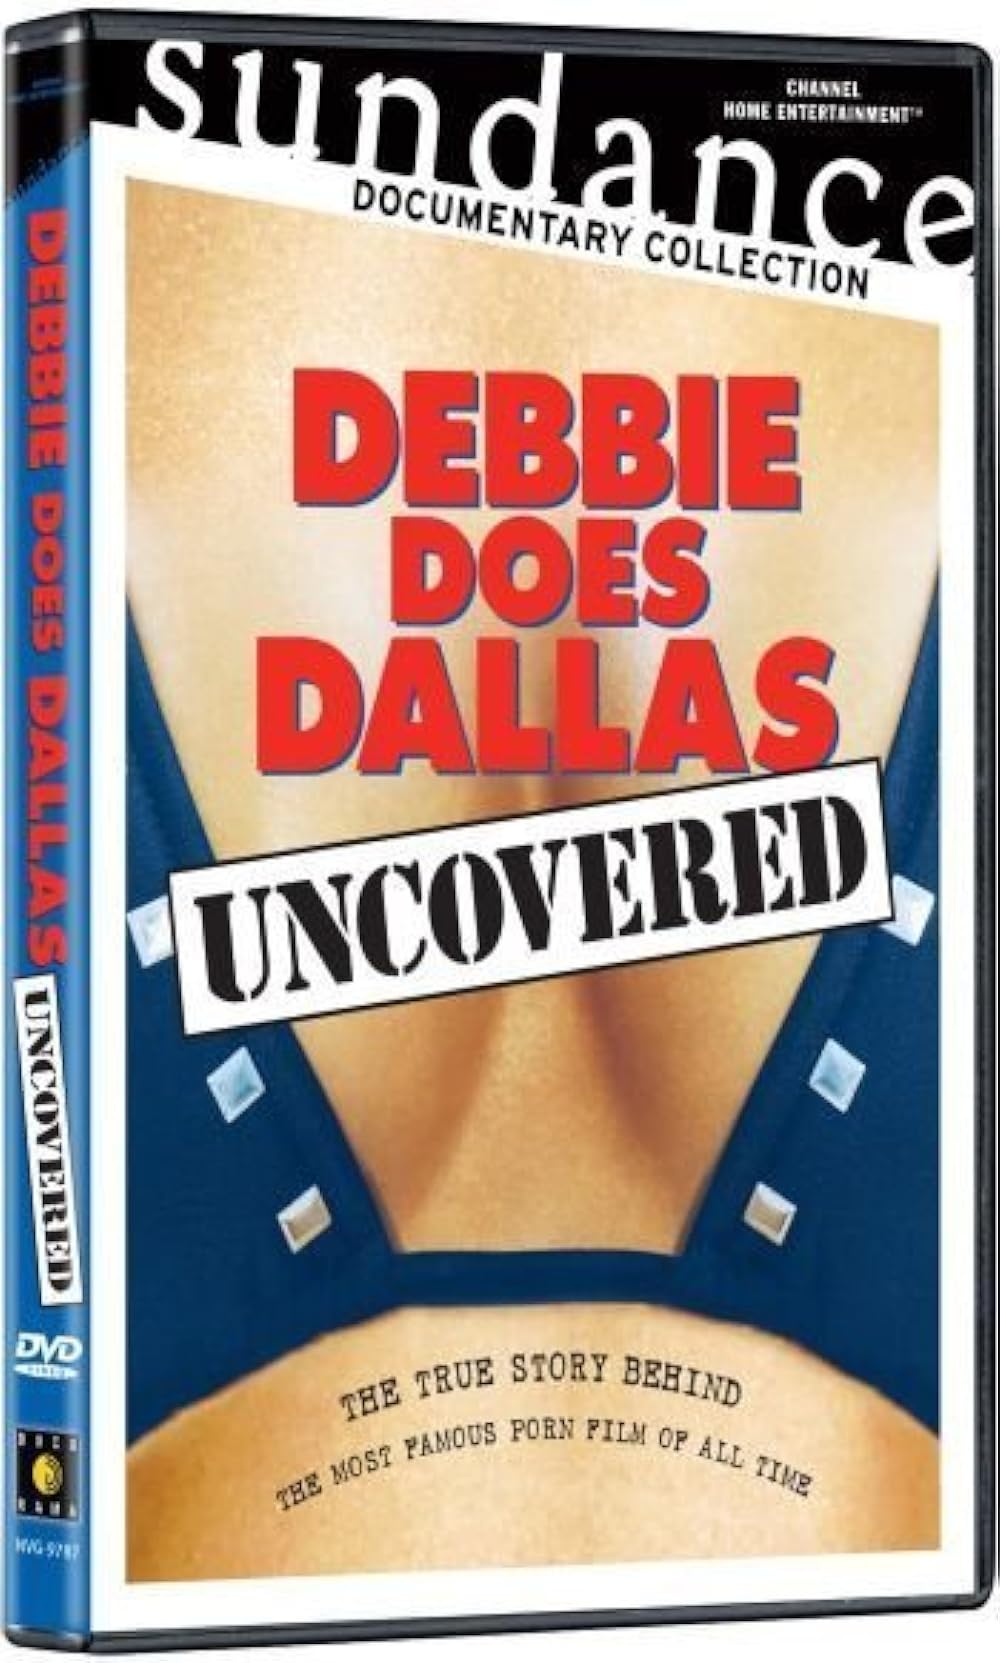 andrew rota recommends streaming debbie does dallas pic